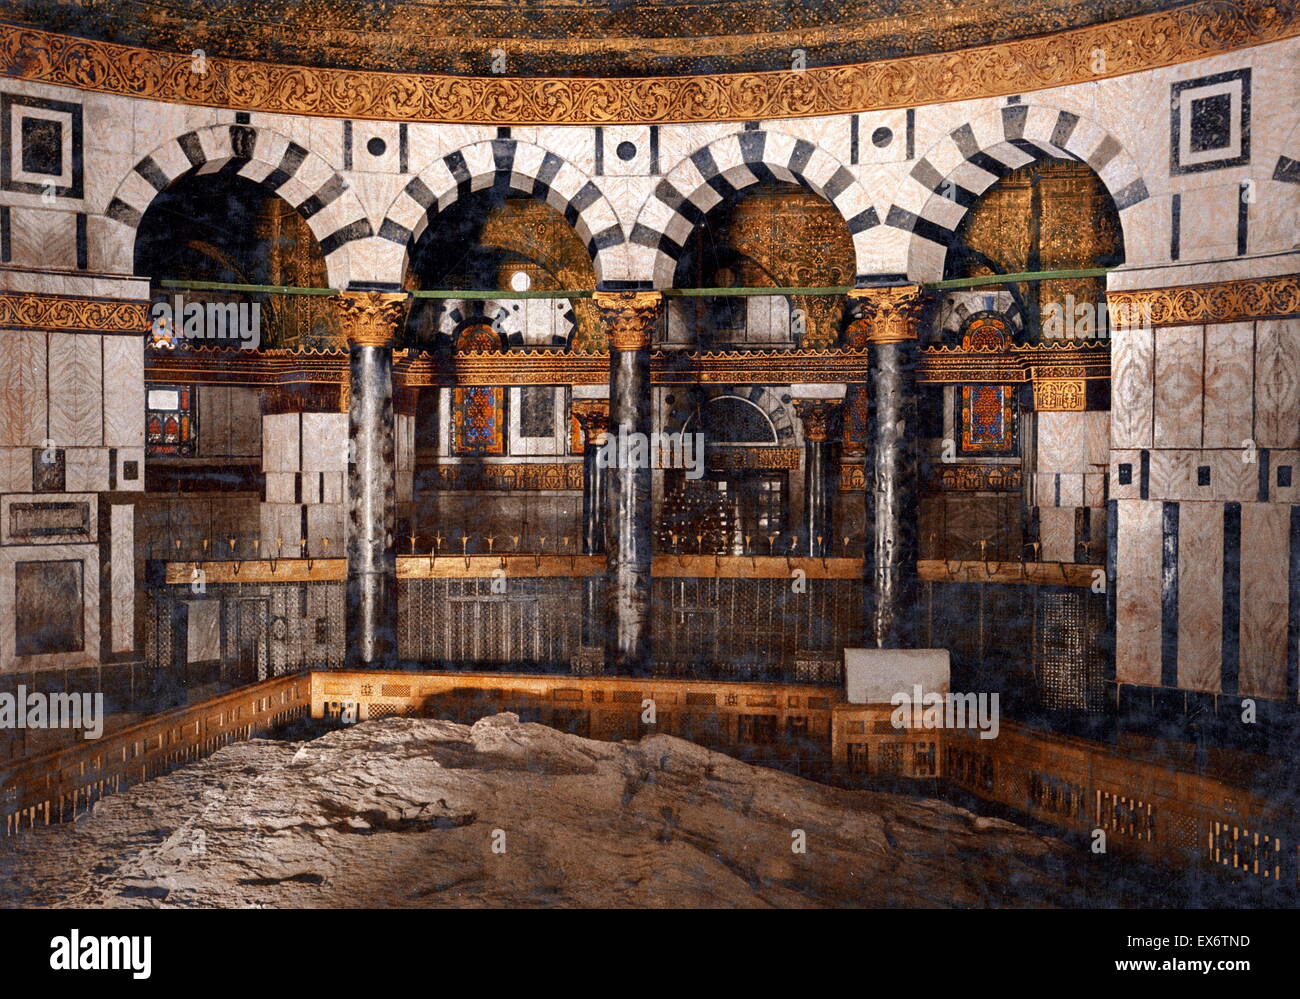 the-foundation-stone-inside-the-dome-of-the-rock